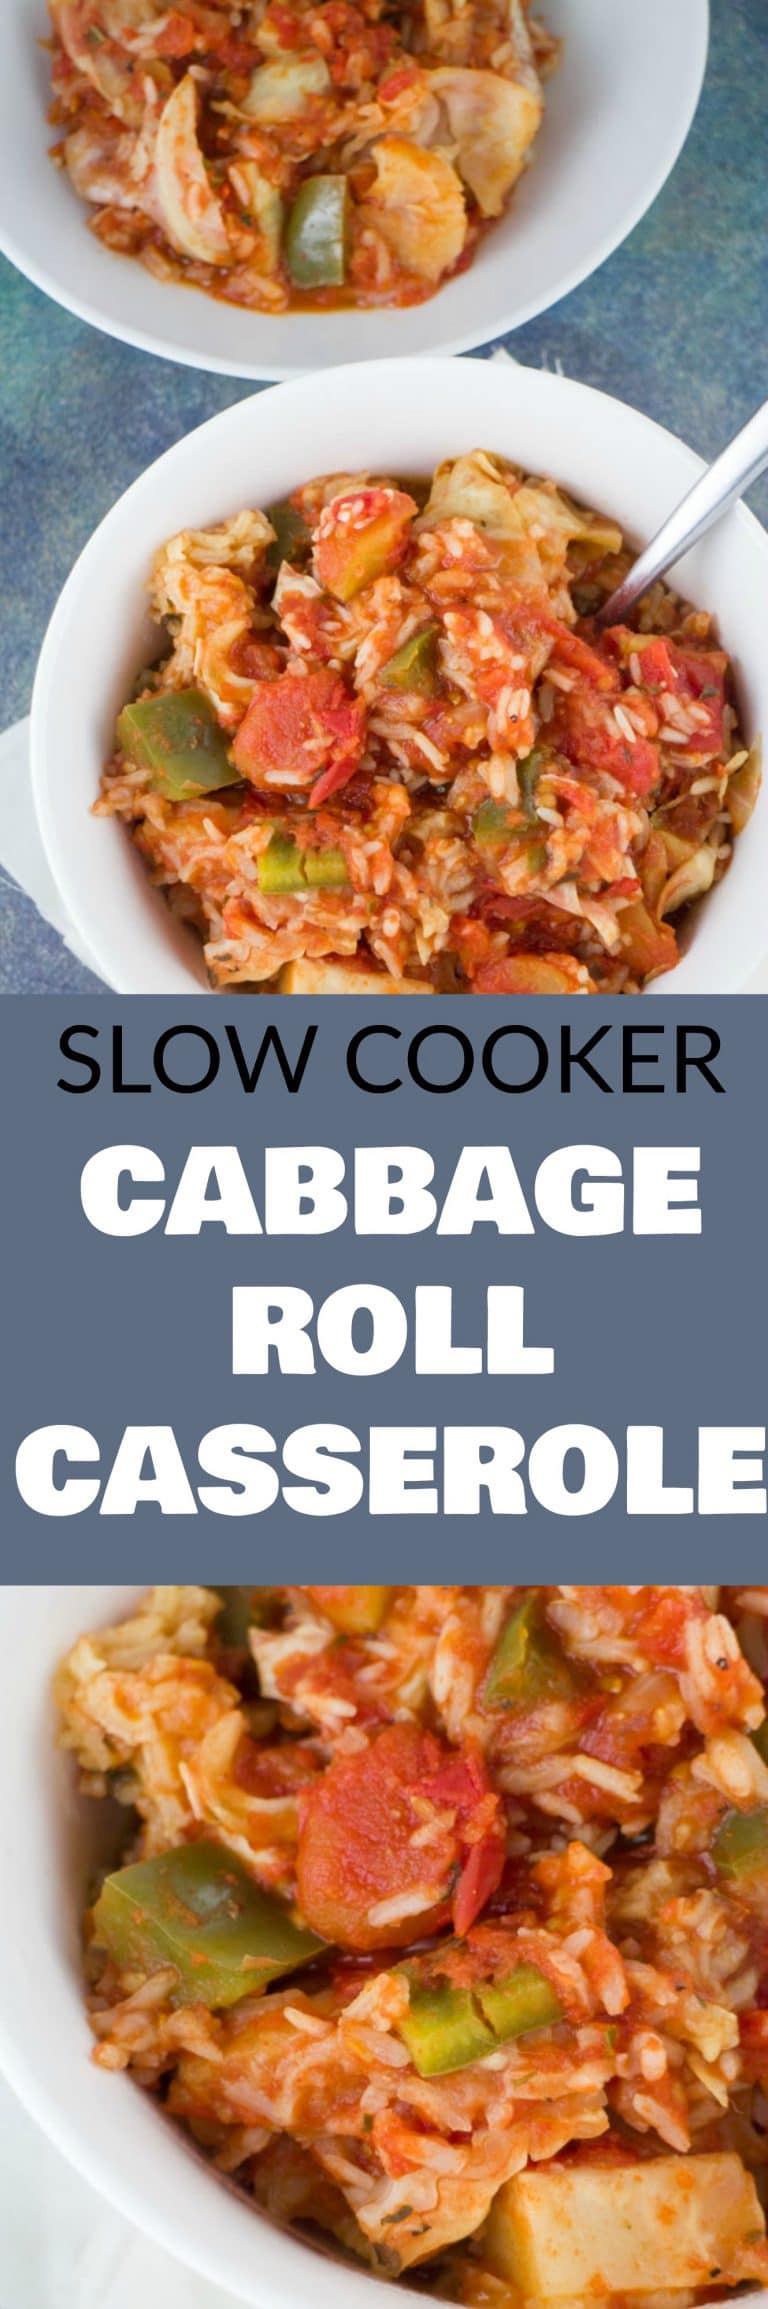 Learn more about healthy slow cooker recipes with info from this great article. Click on this post to discover dinner ideas for tonight. #mealprep #healthyeating #nutrition #healthymeals #healthyrecipes #healthylifestyle #healthylife #healthyliving #health